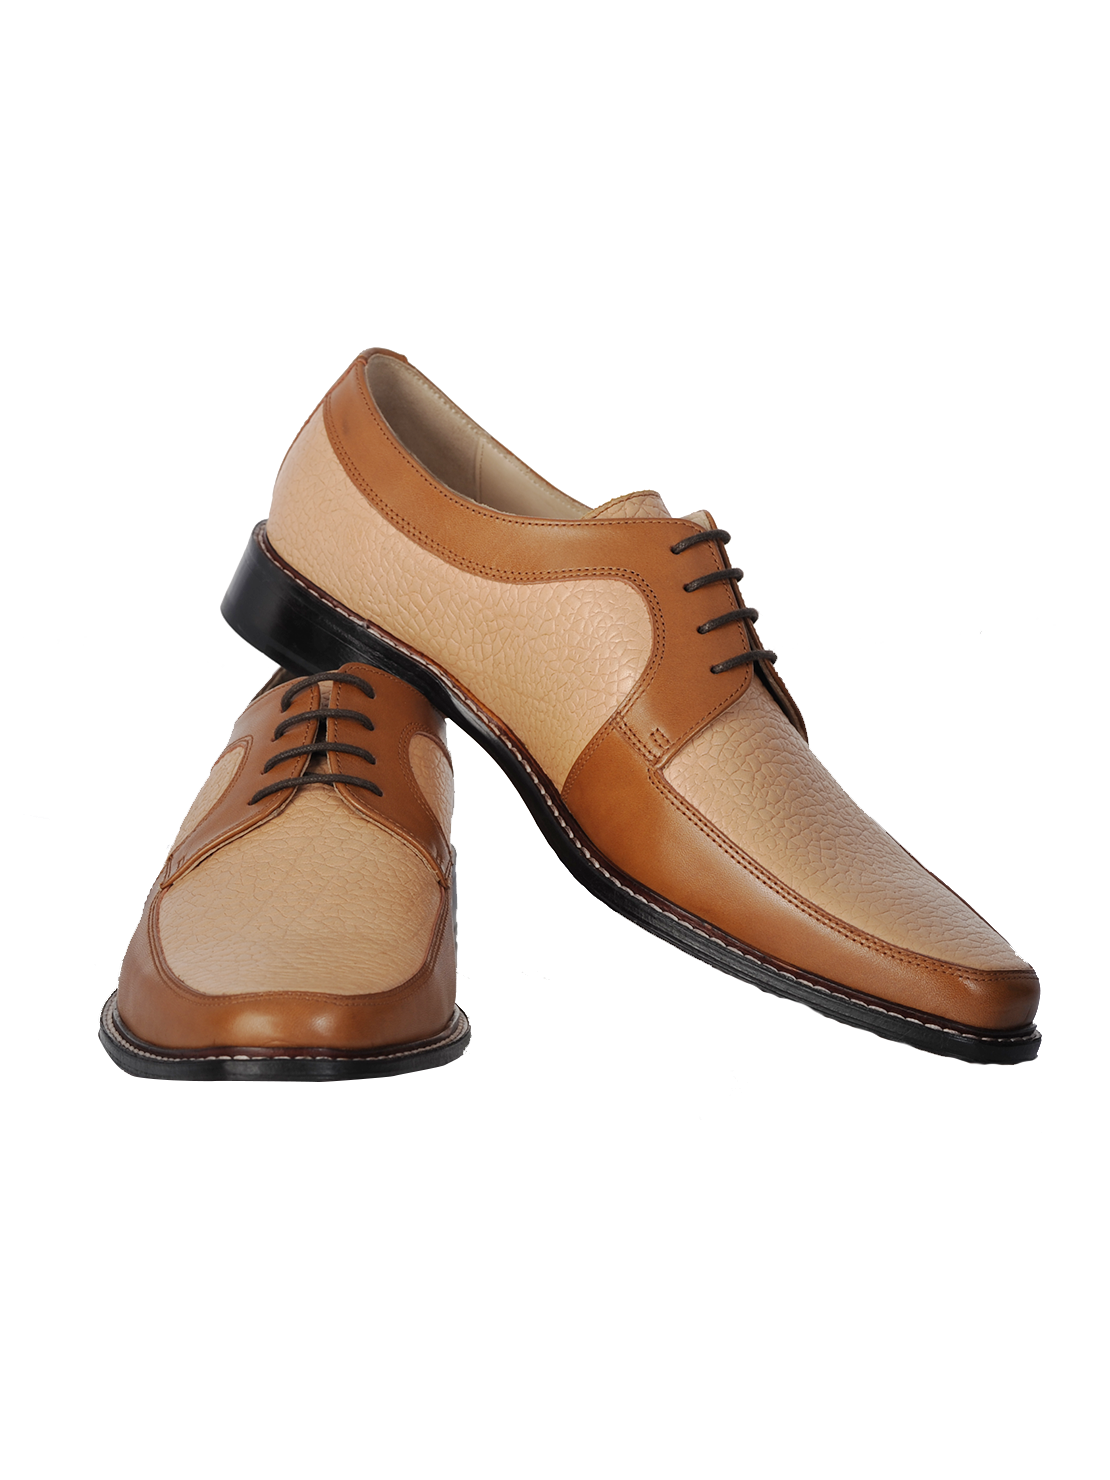 Men Tan Derby Casual - MNJ - New Shoes and Bags Online Store